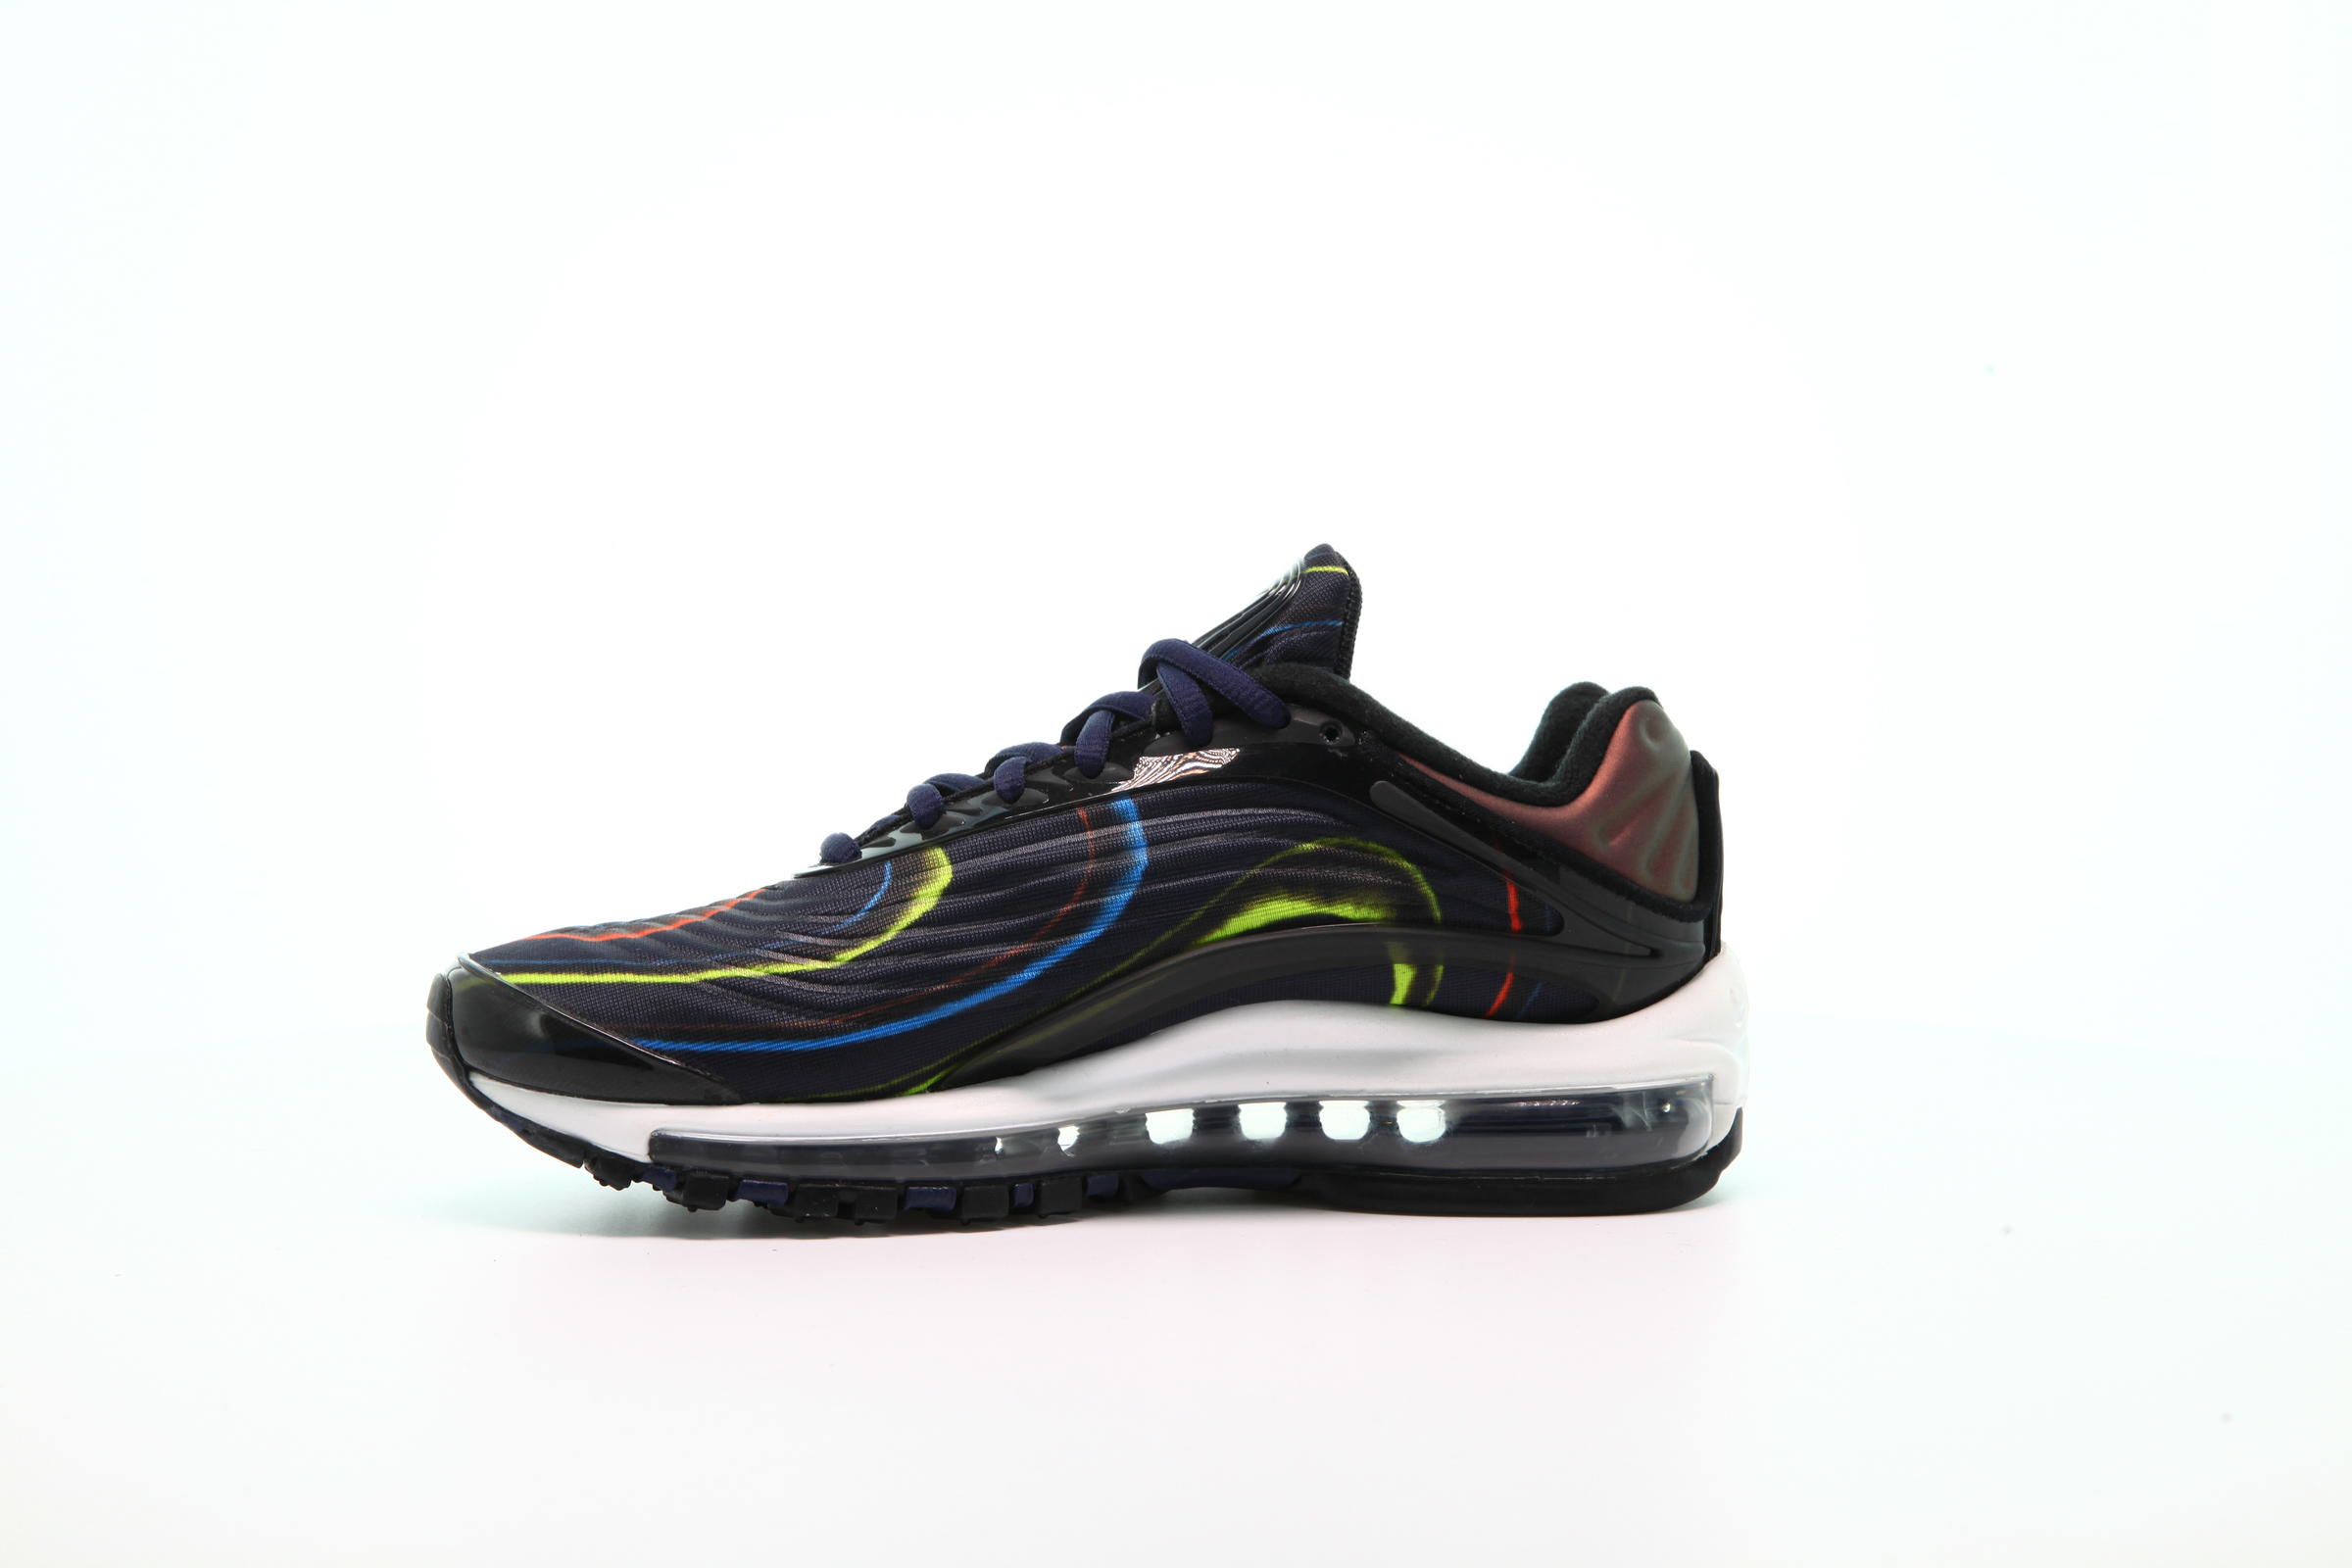 Nike WMNS Air Max Deluxe "Black Navy"